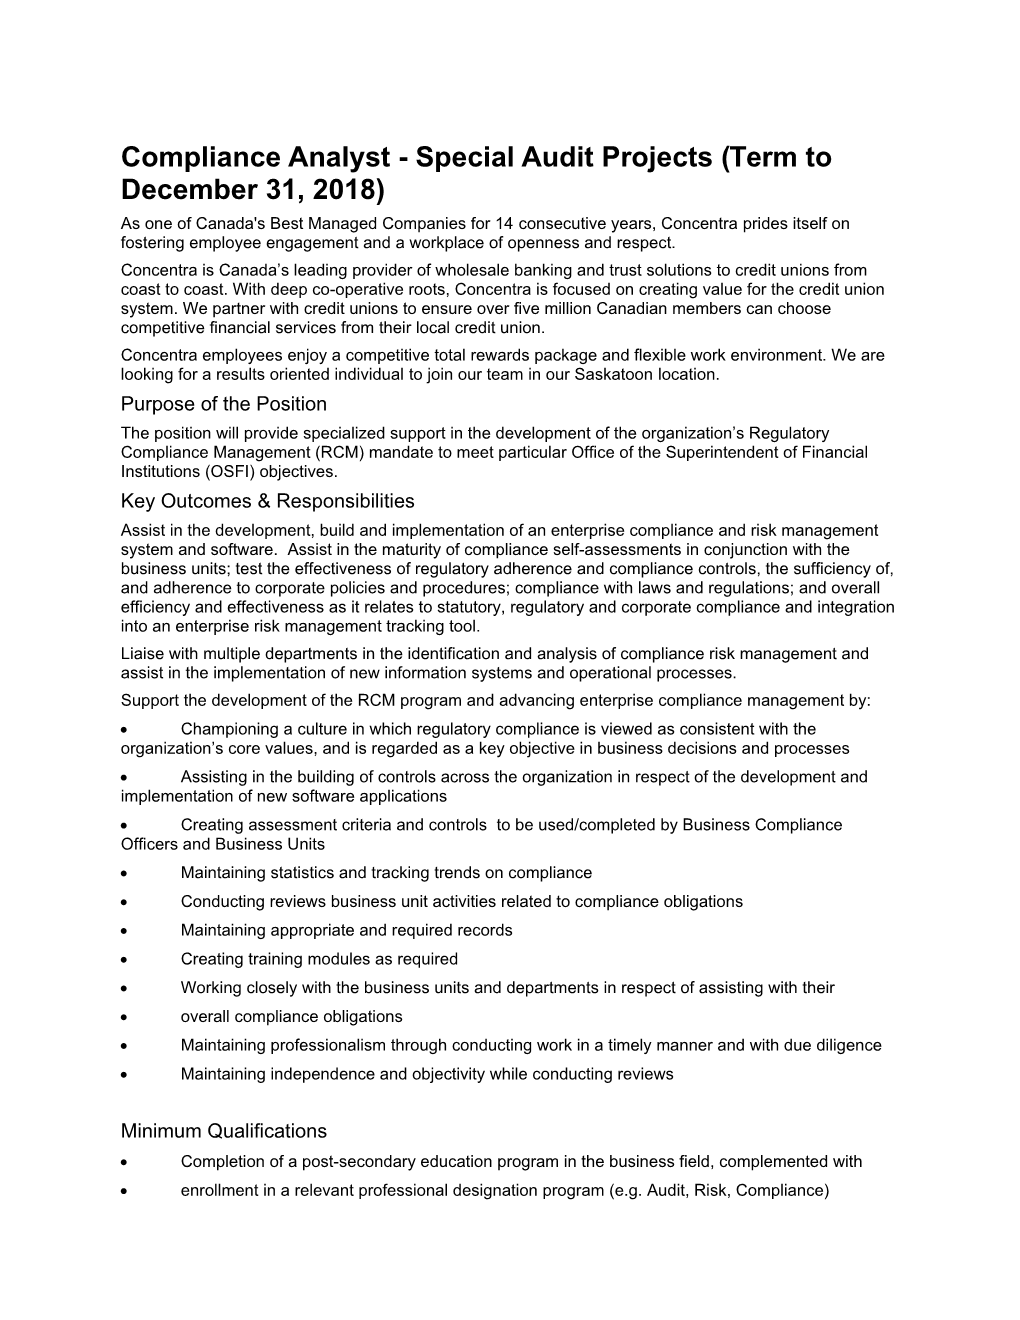 Compliance Analyst - Special Audit Projects (Term to December 31, 2018)